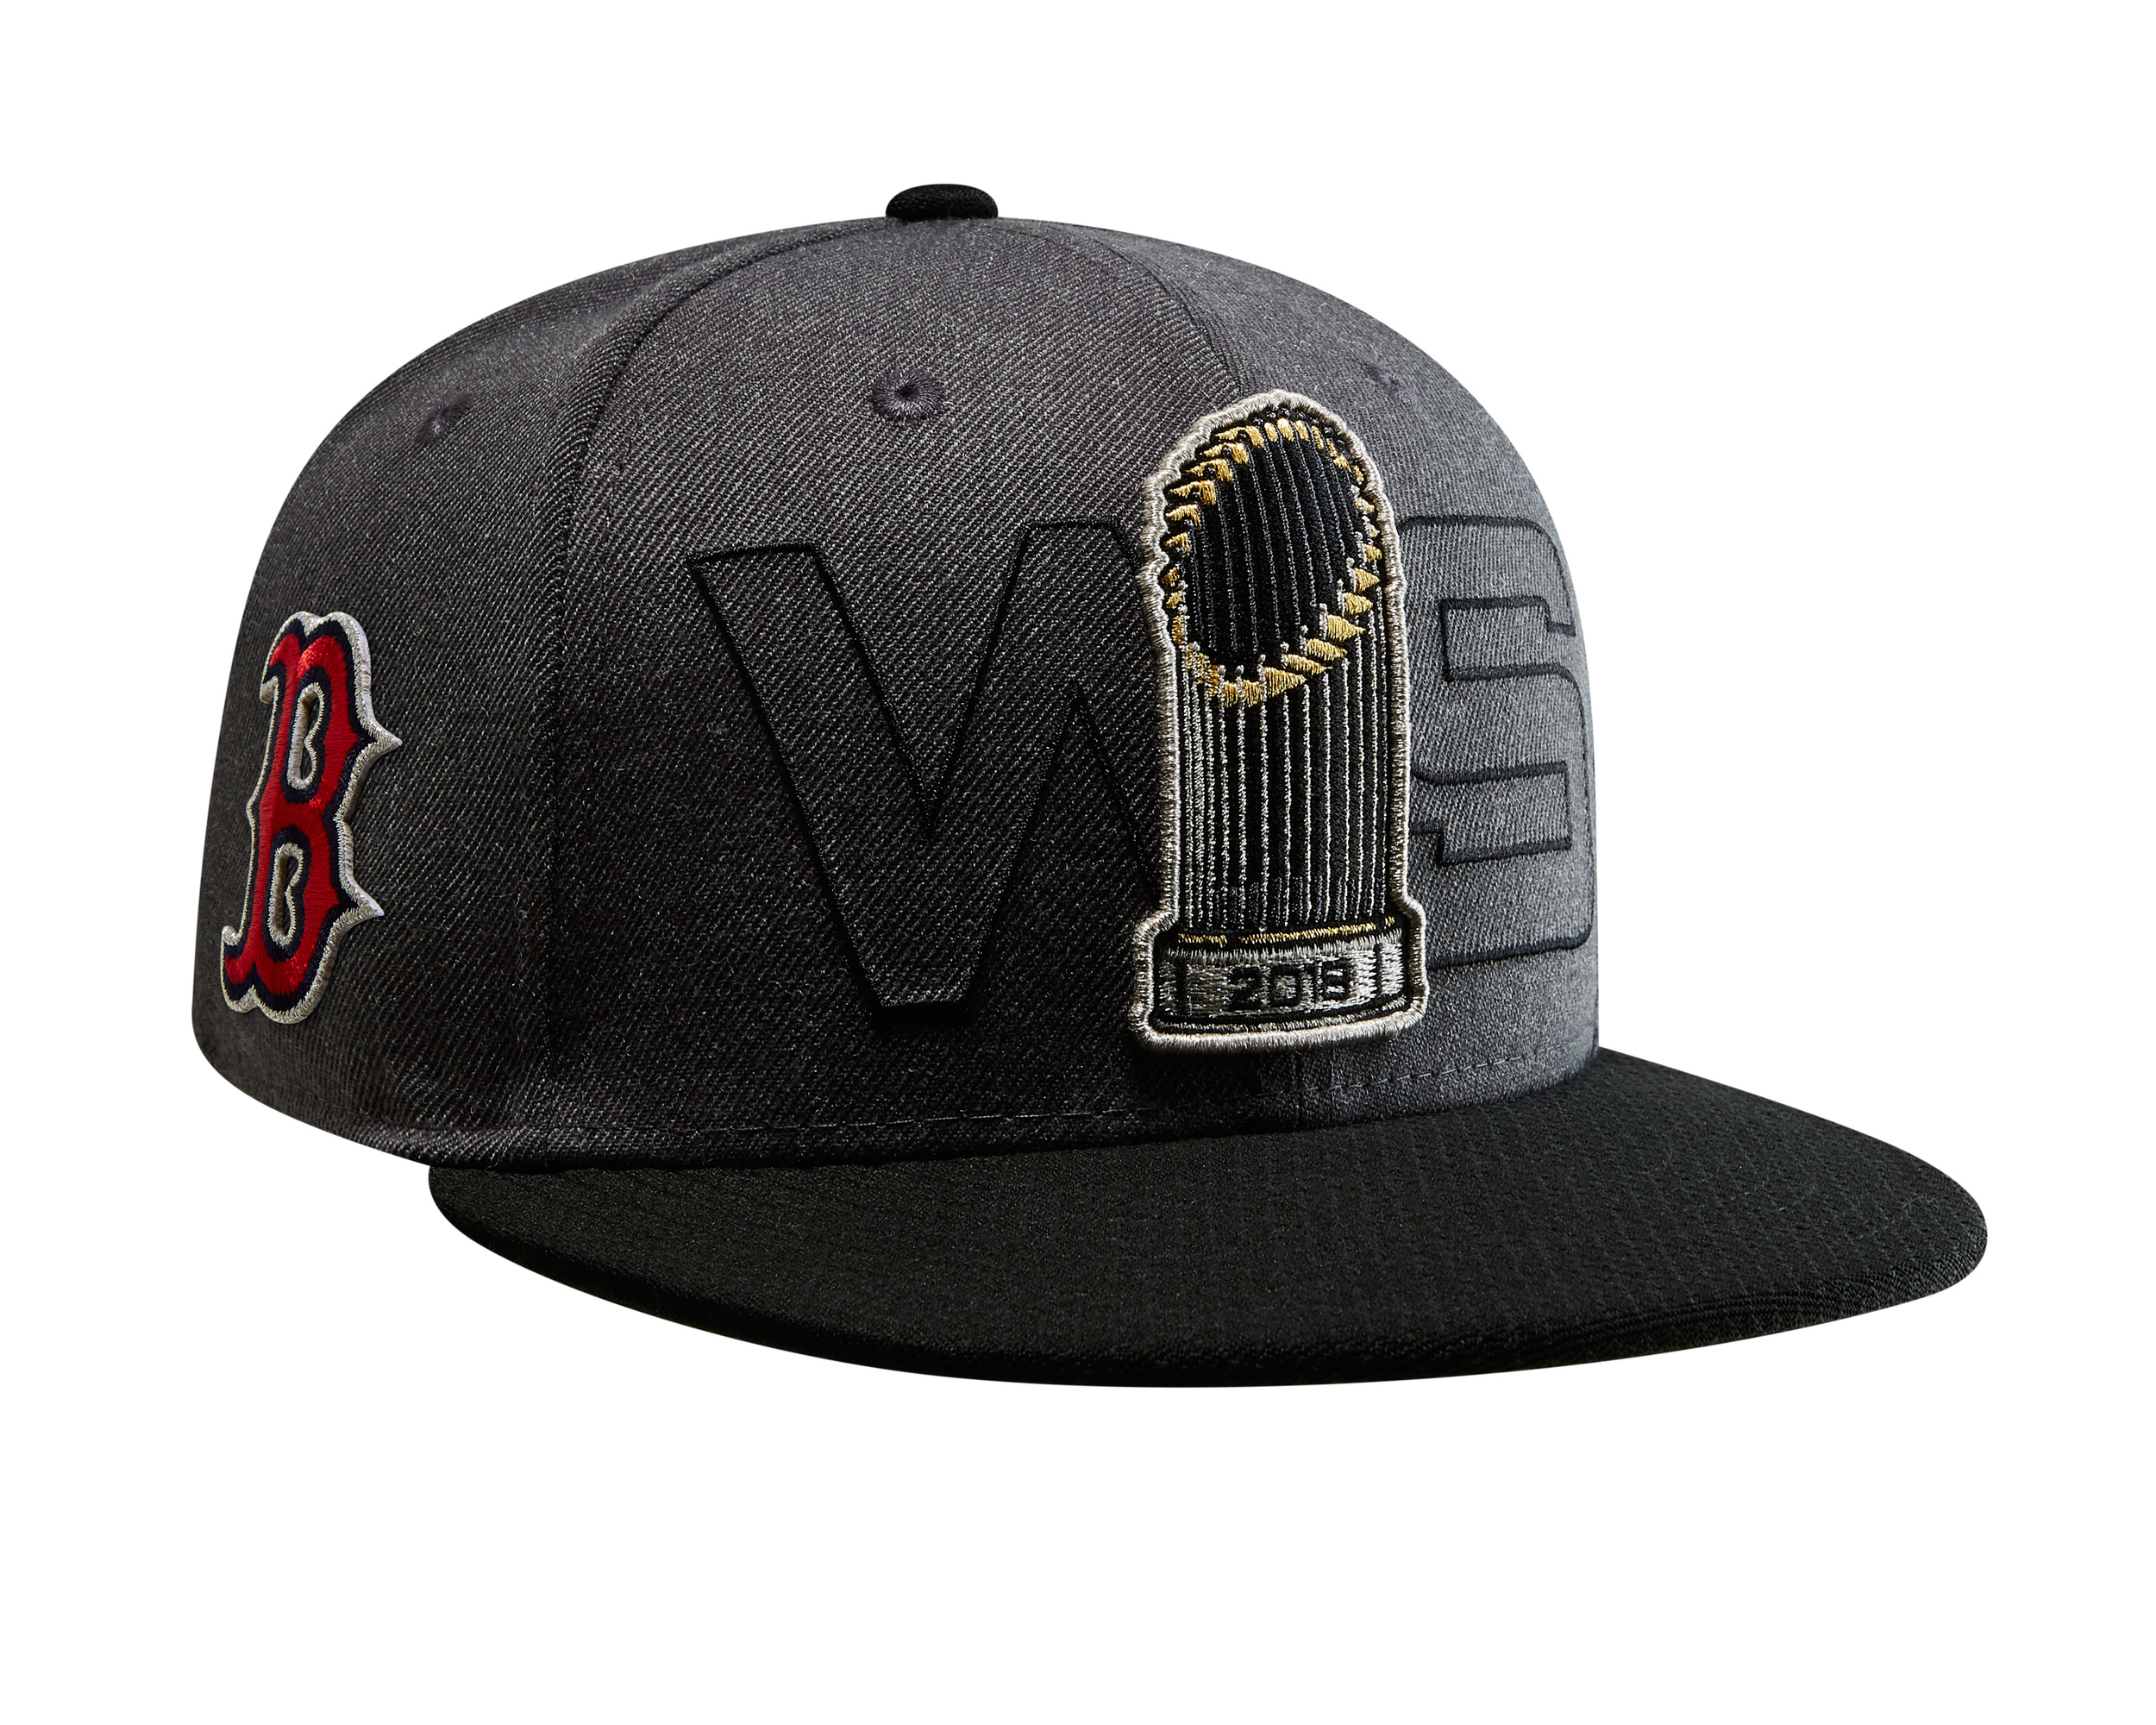 New Era Cap Drops Red Sox World Series Champion Collection with Hats and  Knits - WearTesters